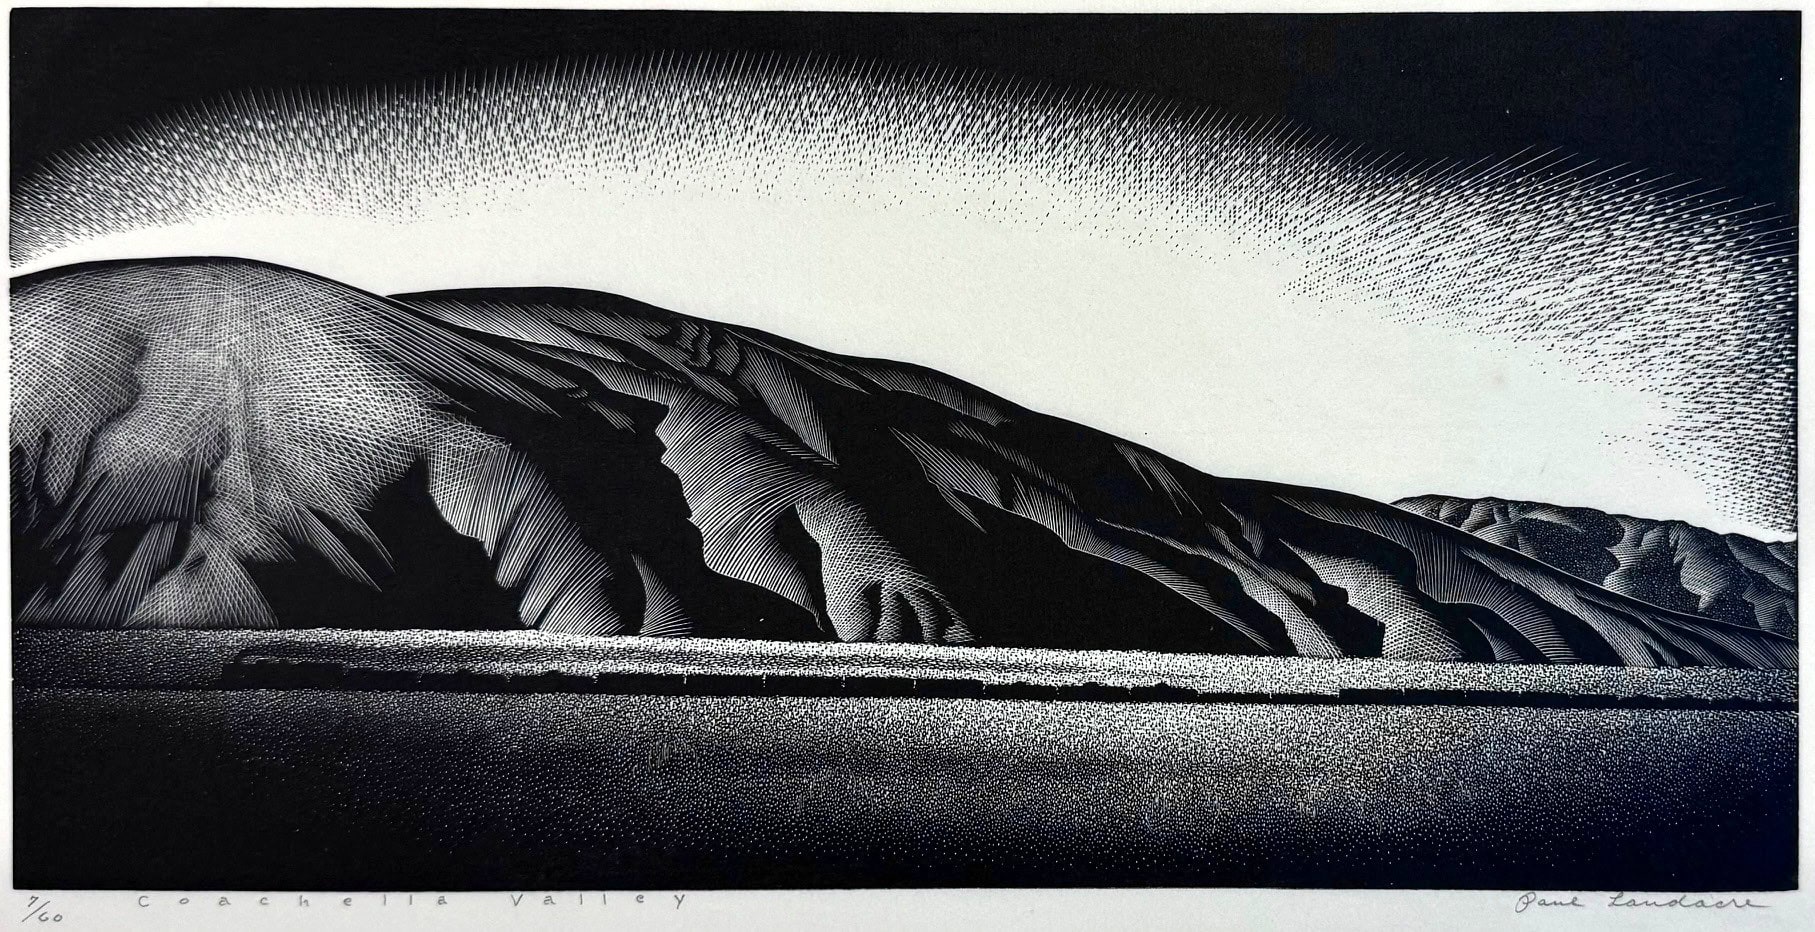 Image of Wood engraving by artist Paul Landacre, entitled "Coachella Valley" and illustrating the mountains bordering the valley with a small train billowing smoke.